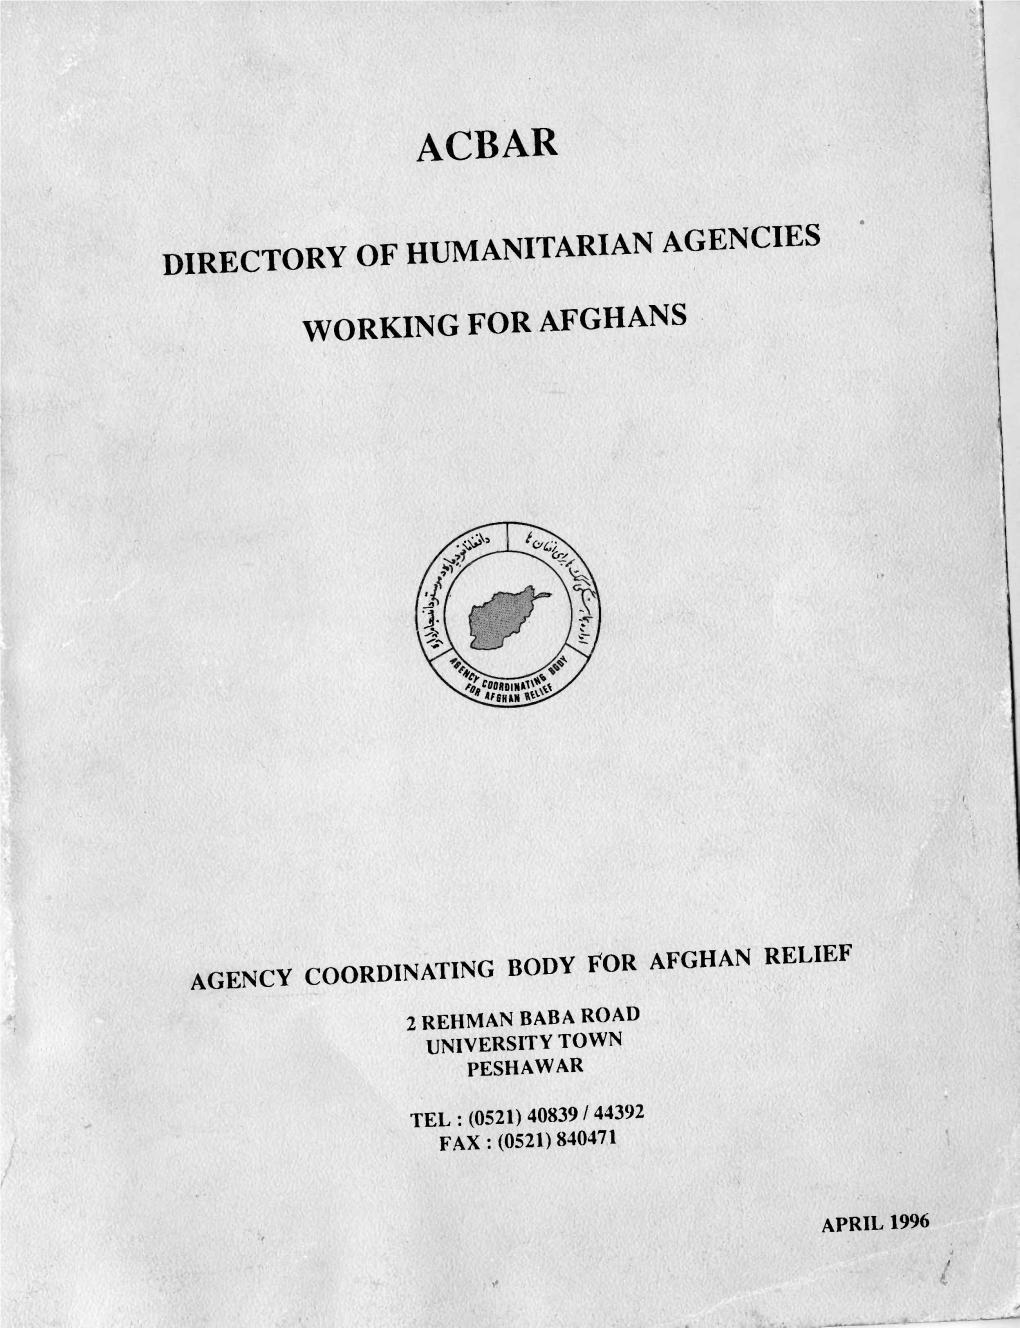 Agencies Working for Afghans" for 1995